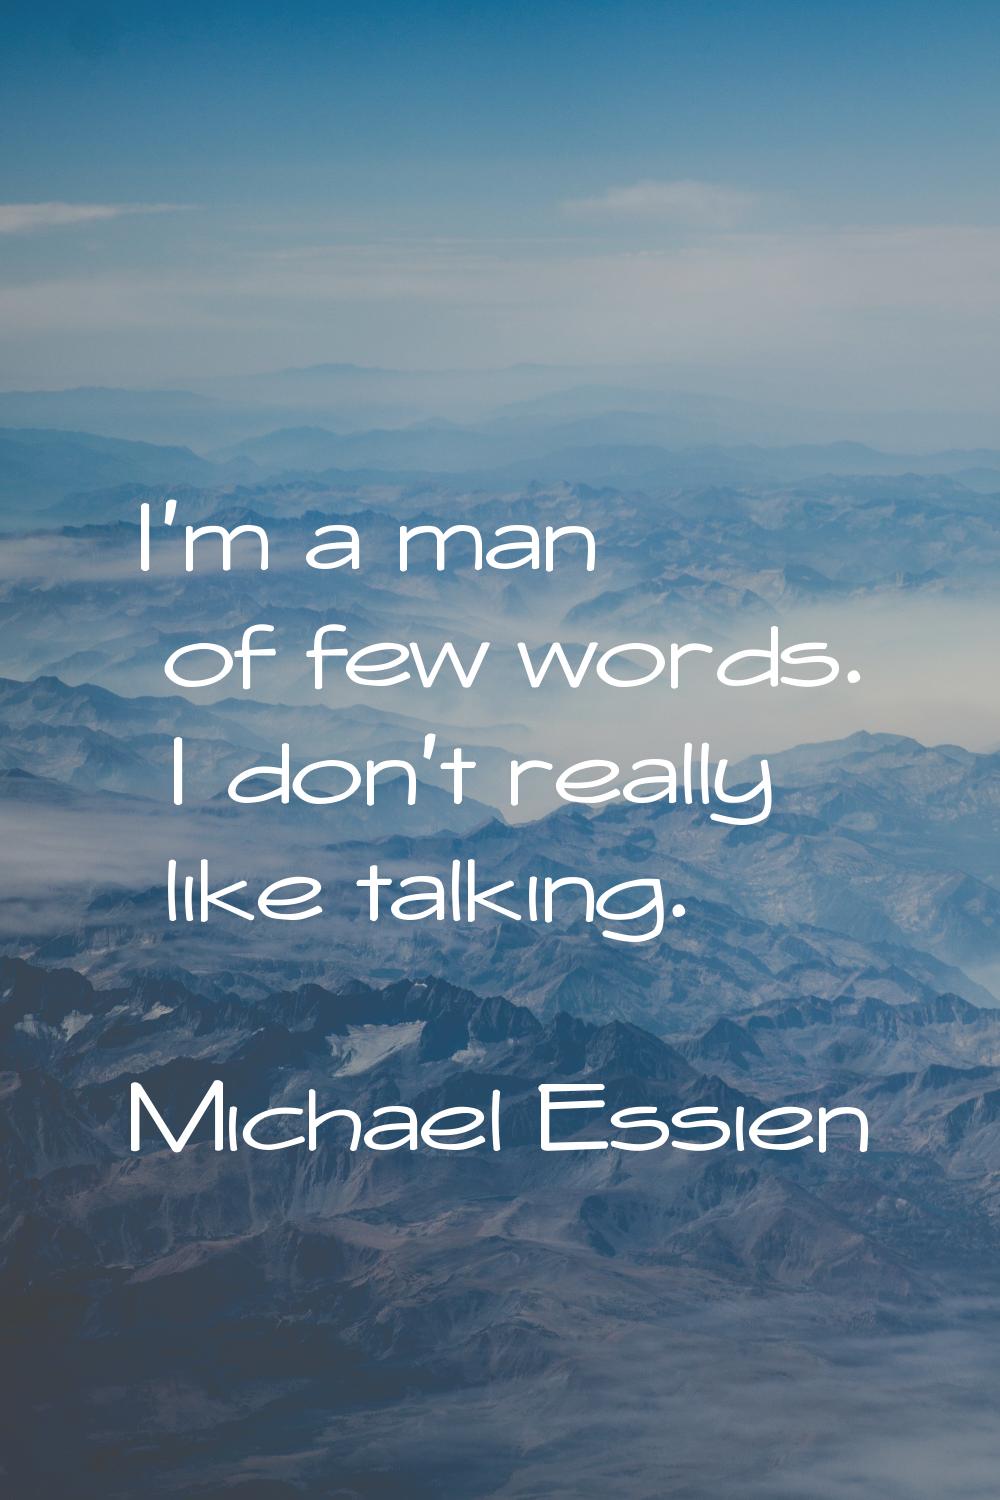 I'm a man of few words. I don't really like talking.